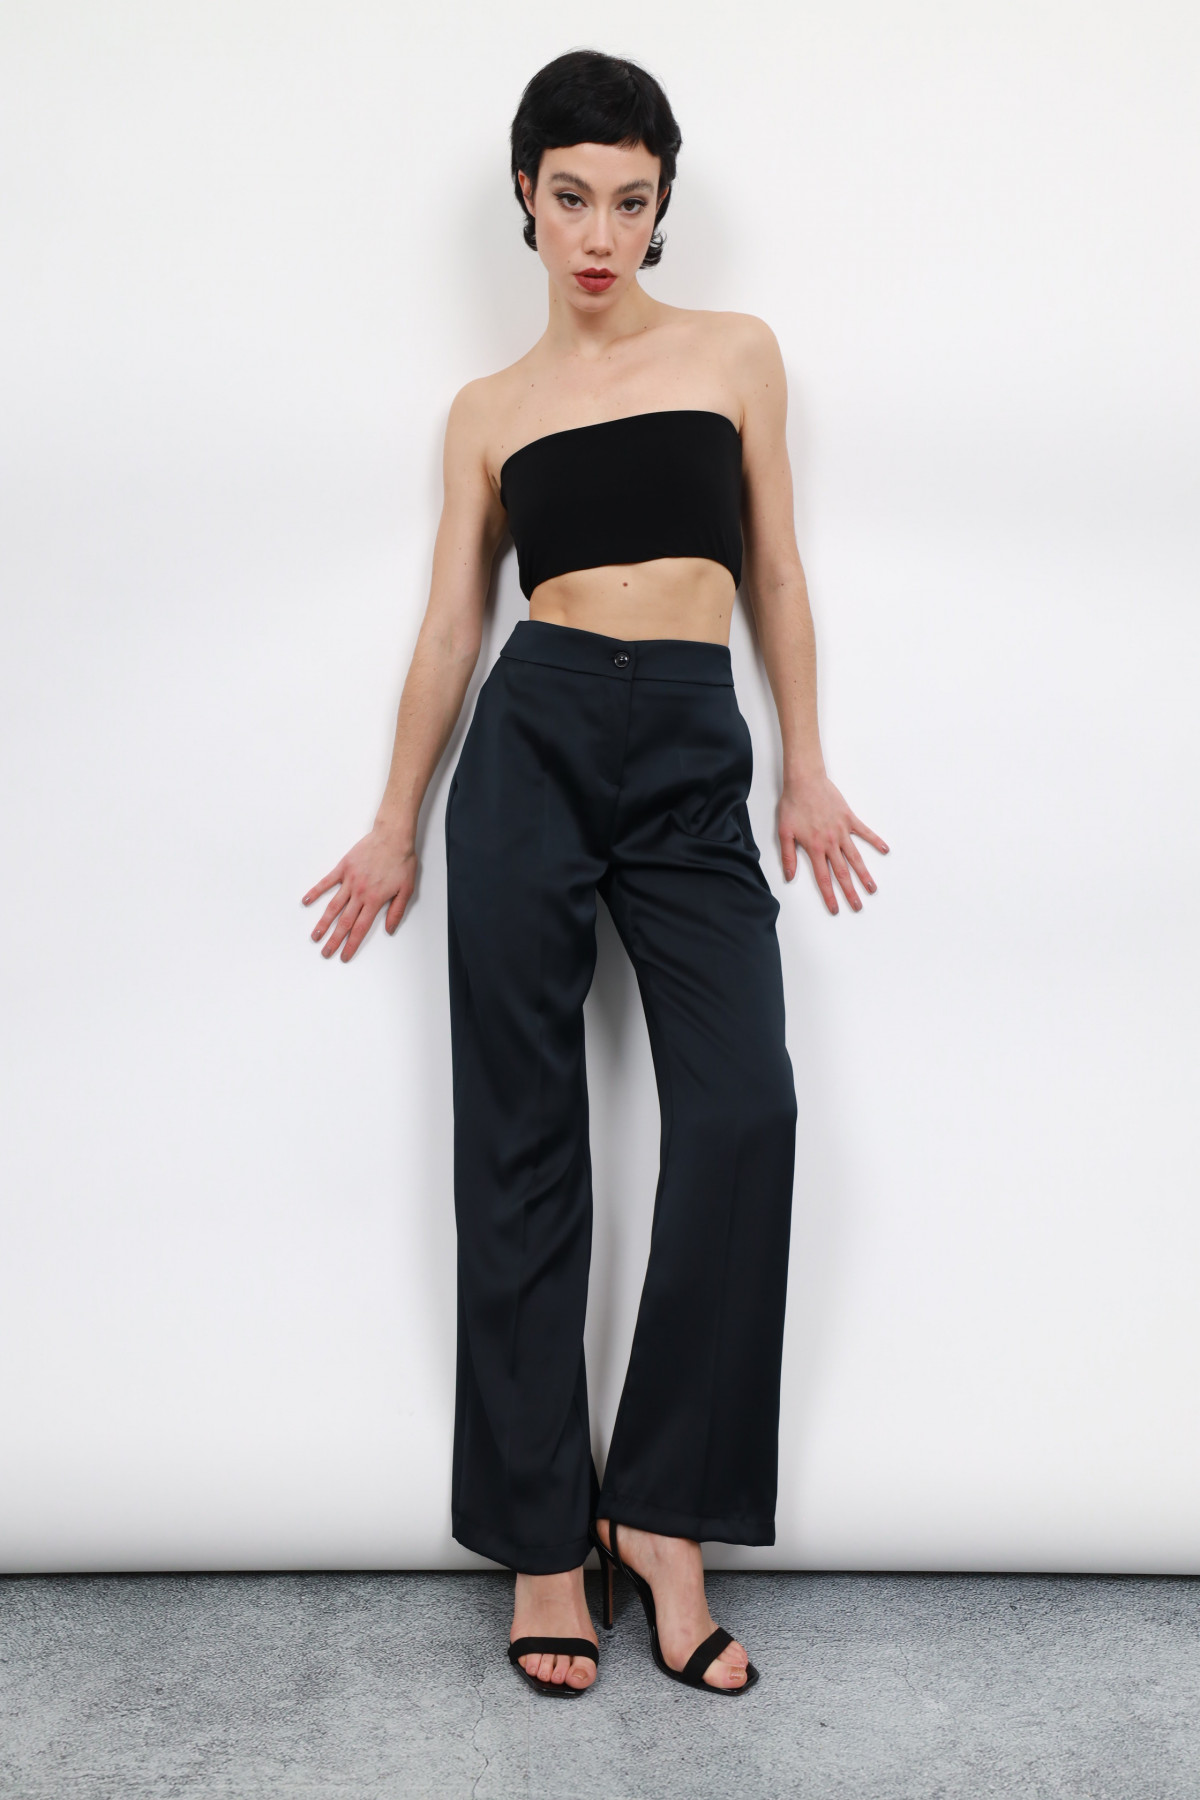 Wide trousers